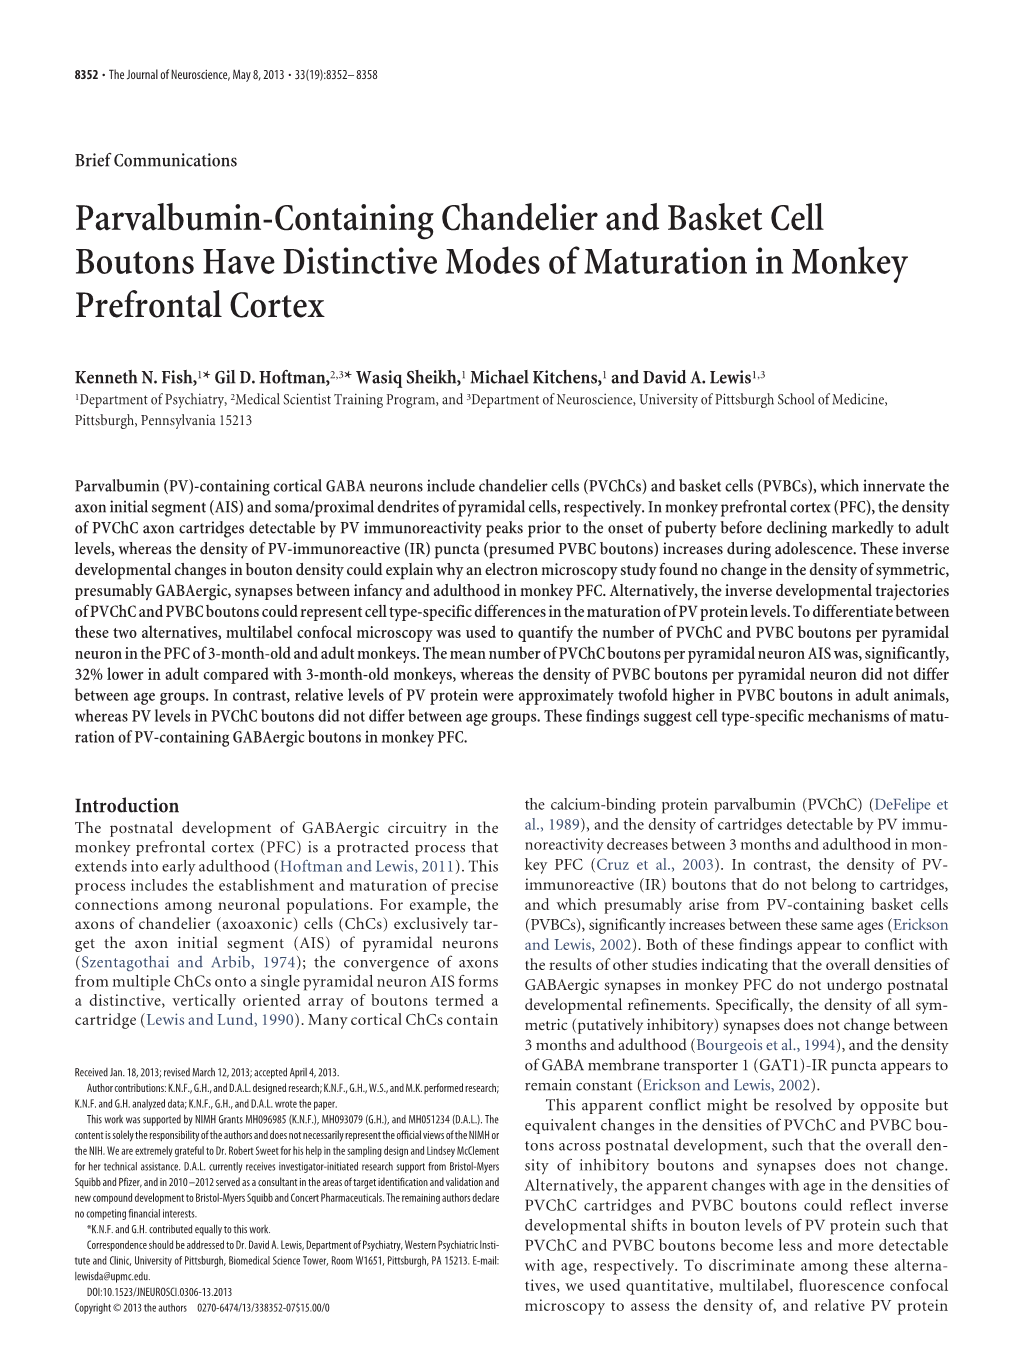 Parvalbumin-Containing Chandelier and Basket Cell Boutons Have Distinctive Modes of Maturation in Monkey Prefrontal Cortex